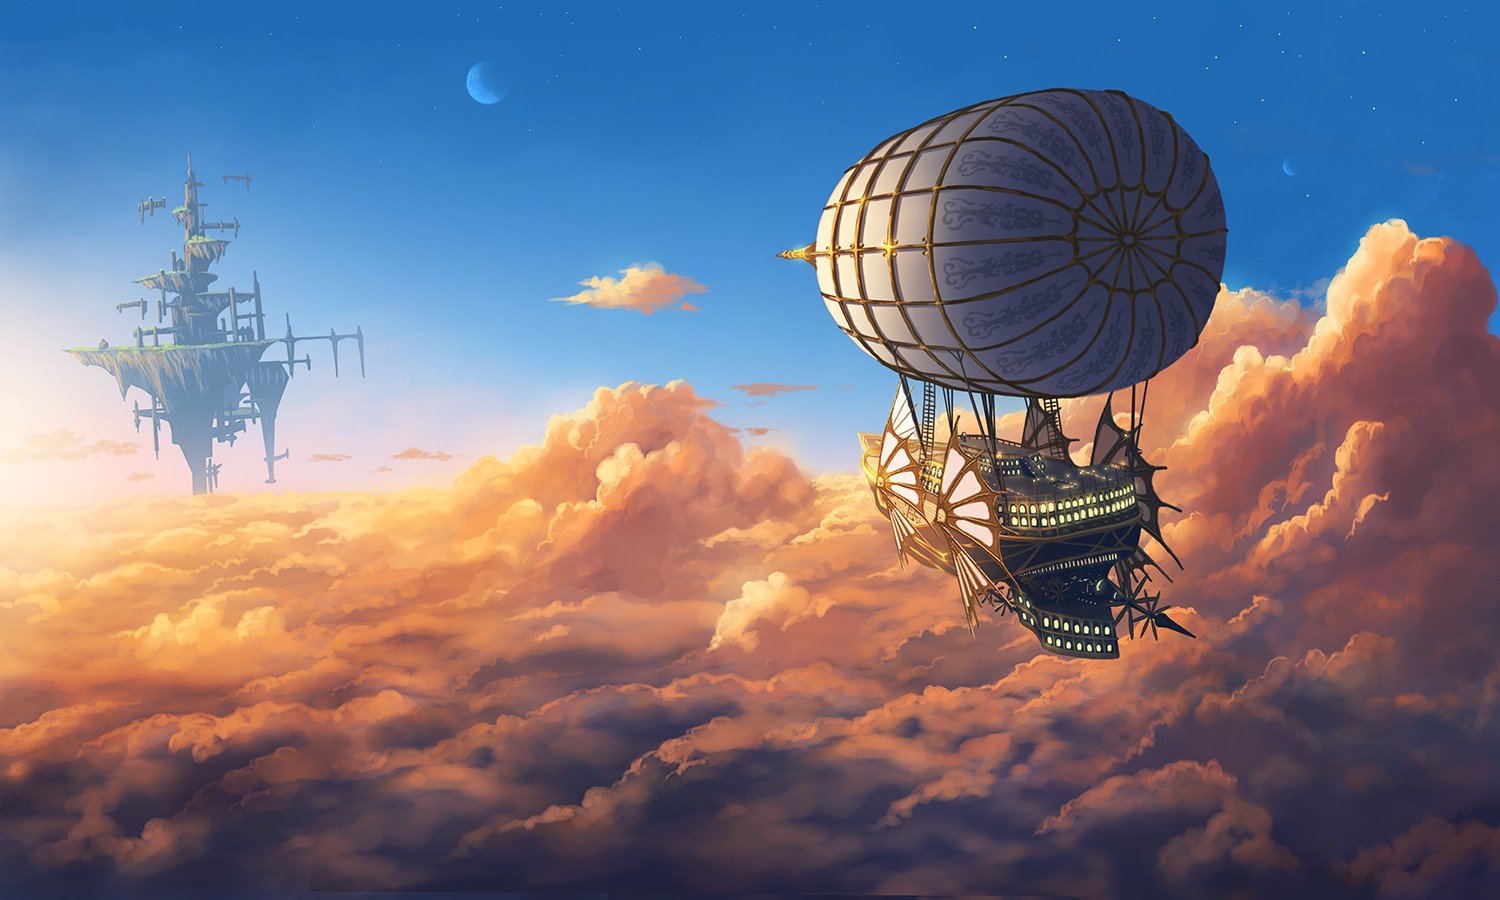 aircraft, Clouds, Fantasy art, Moon, Floating, Sky, Floating island